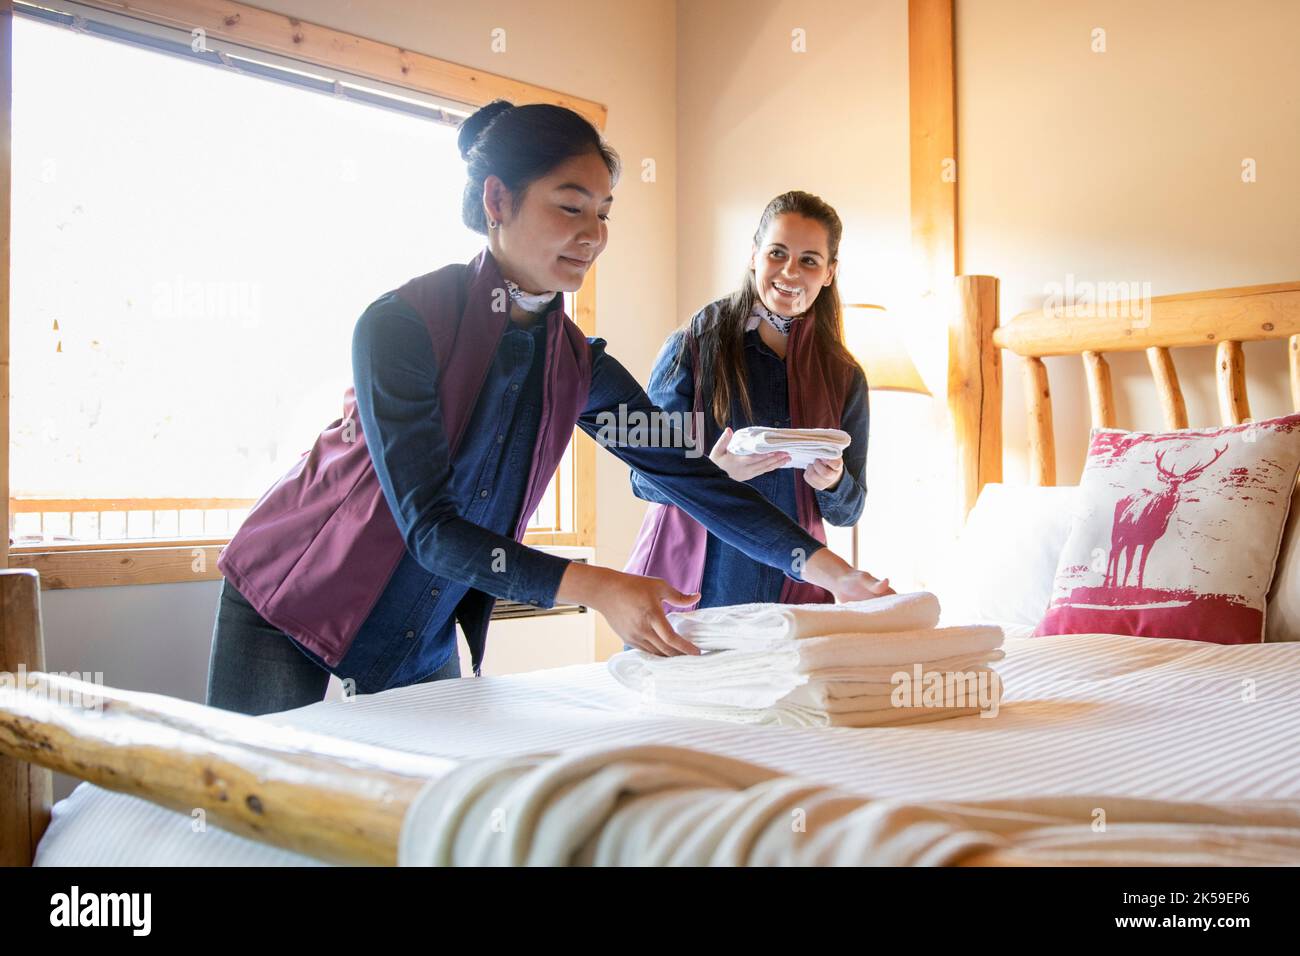 Female hotel employees preparing linens on lodge bed Stock Photo